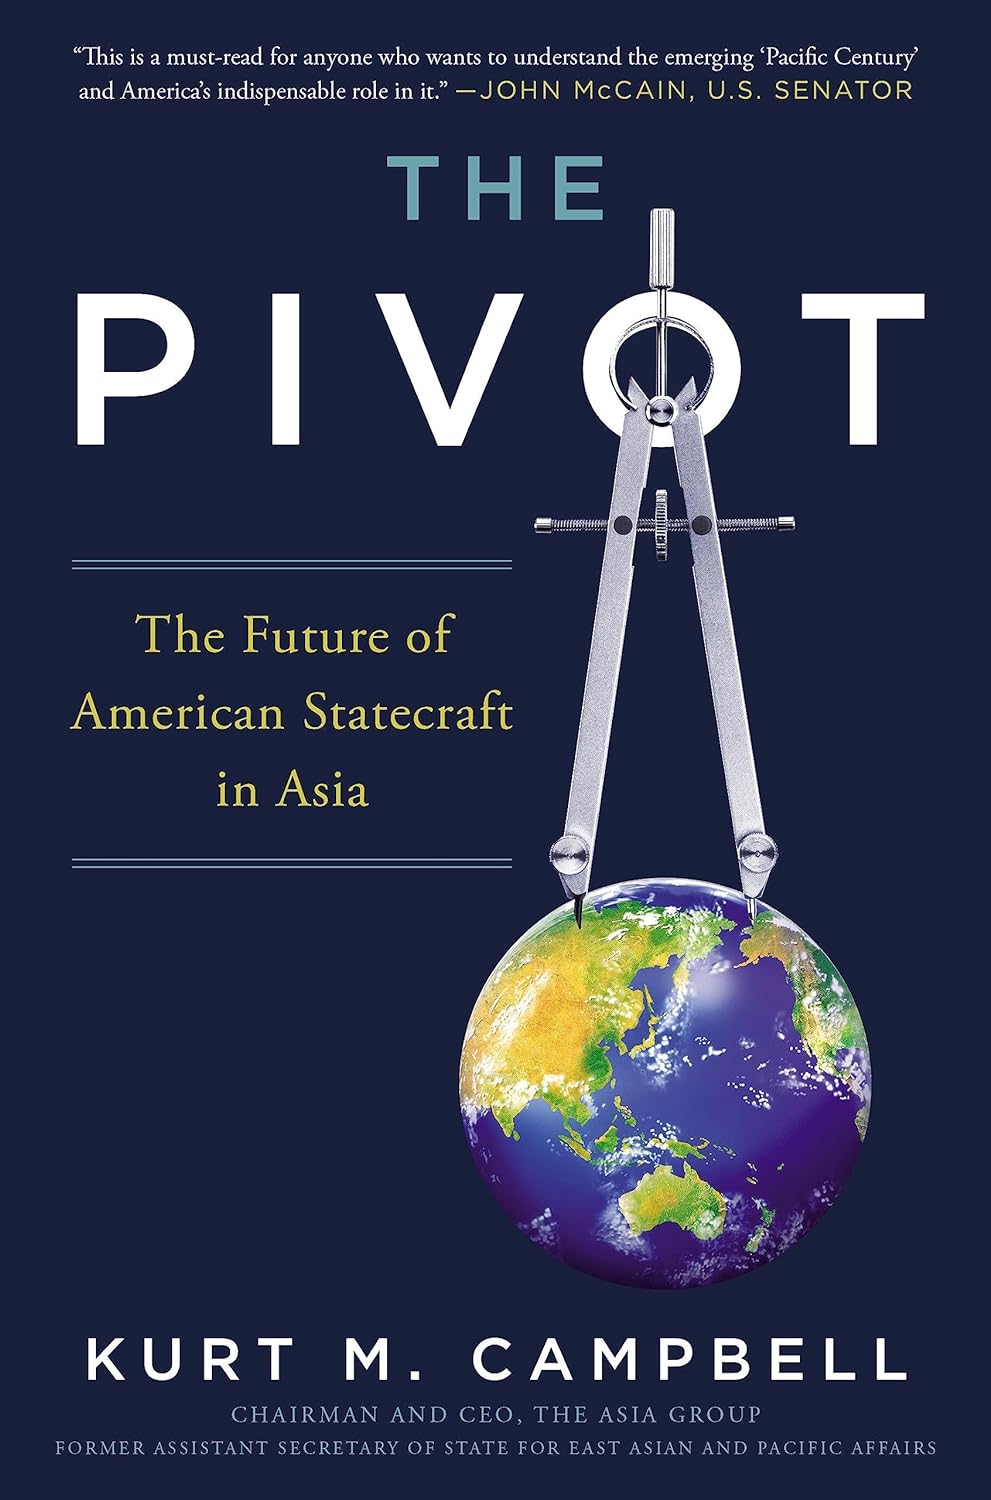 Kurt Campbell: The Pivot – The Future of American Statecraft in Asia